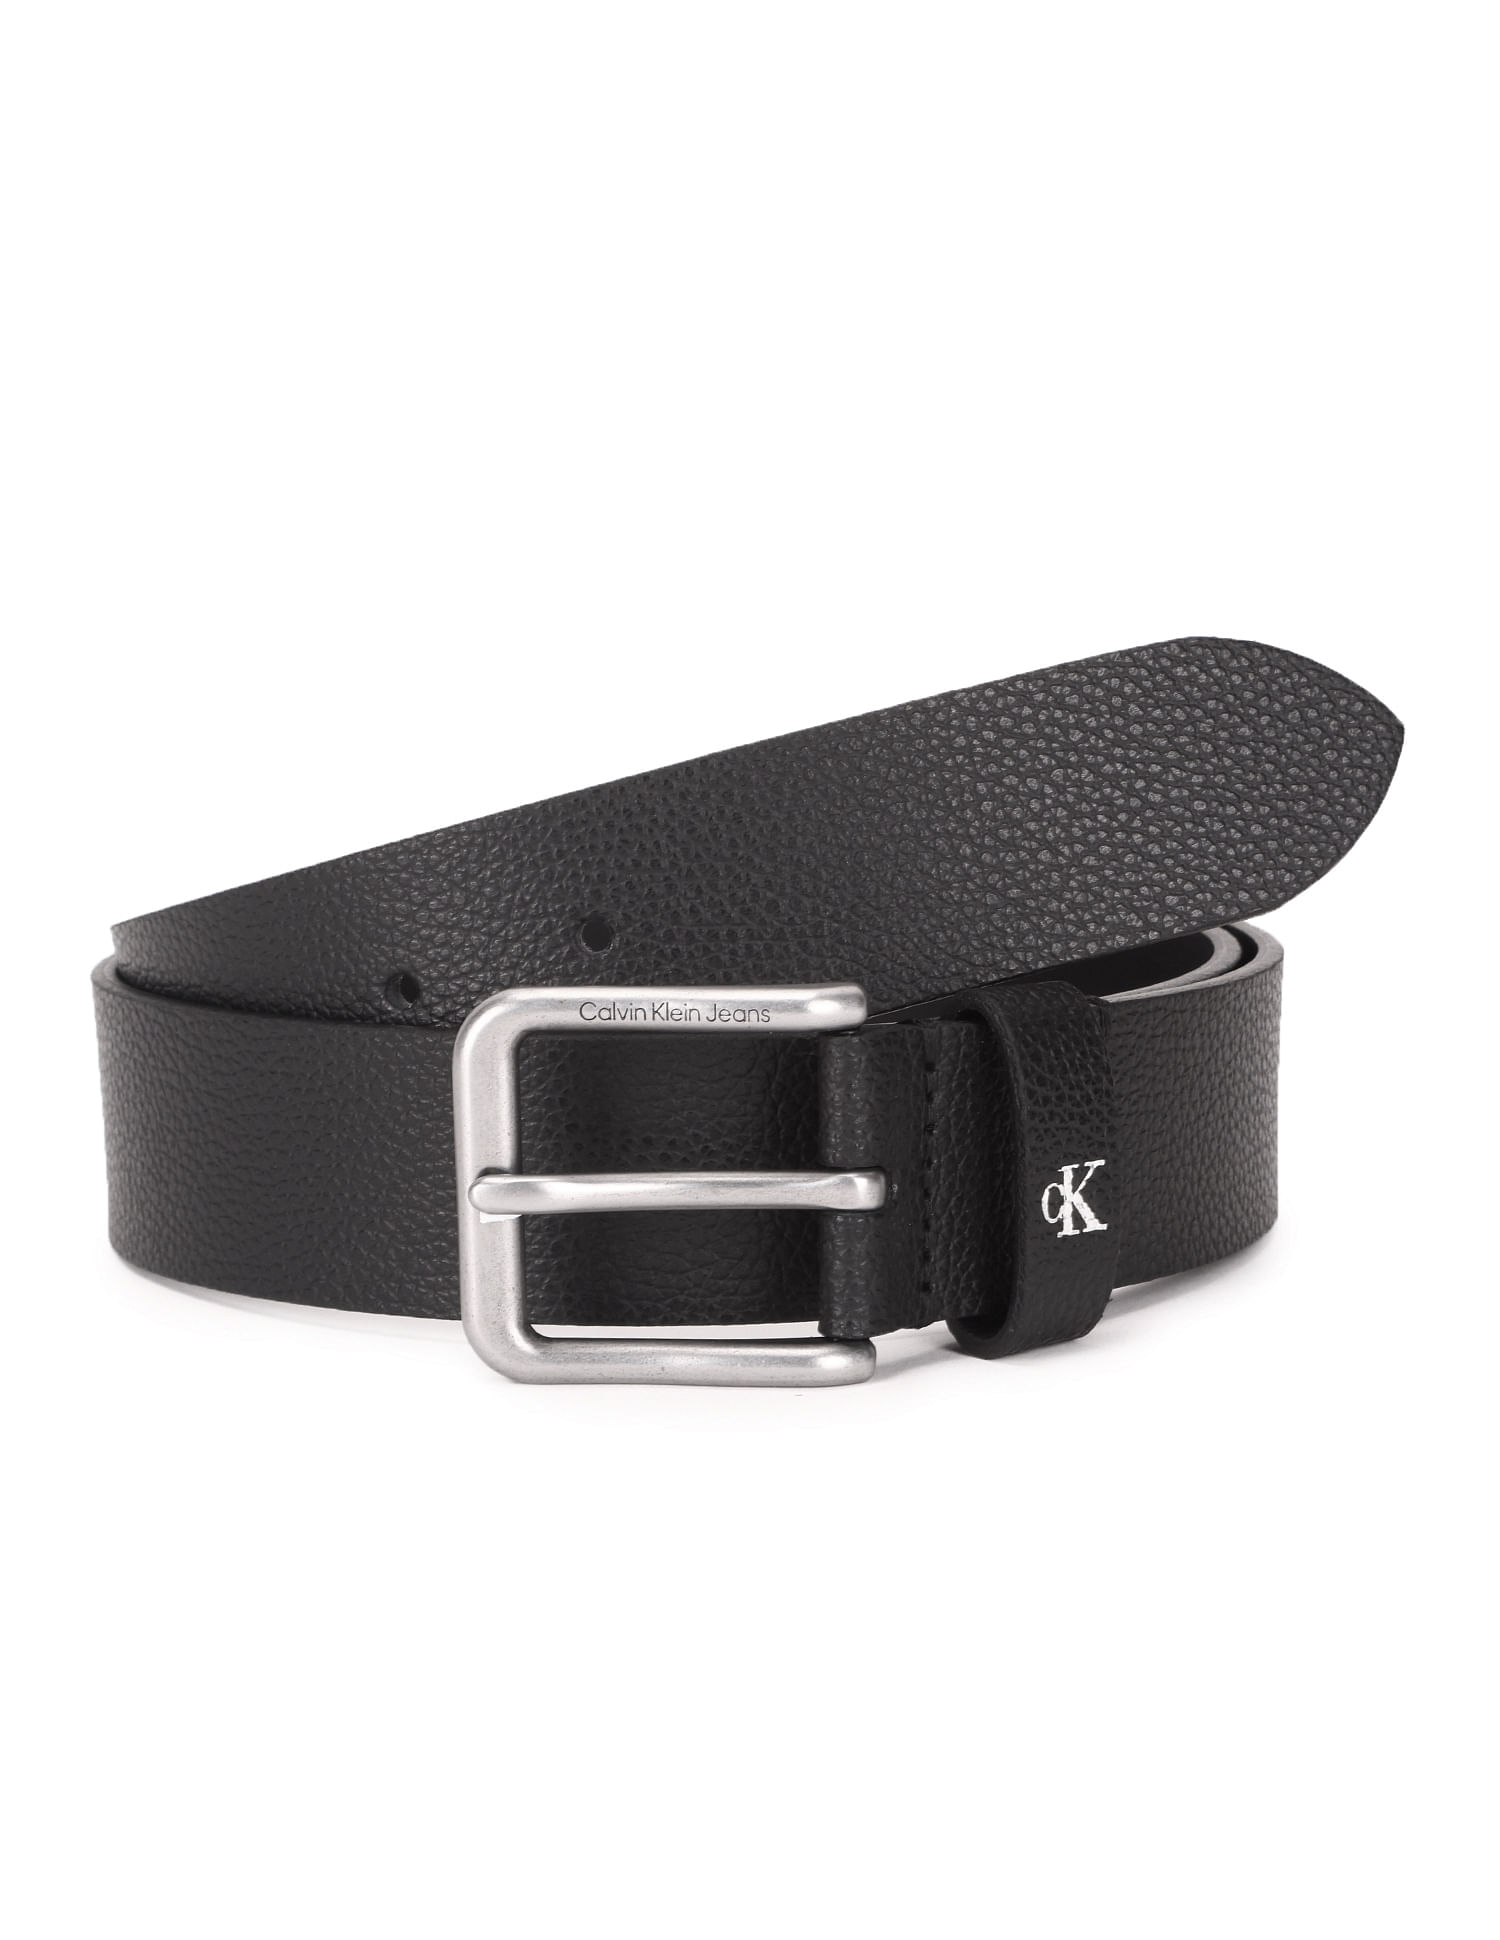 Buy Calvin Klein Jeans Round Classic Leather Belt